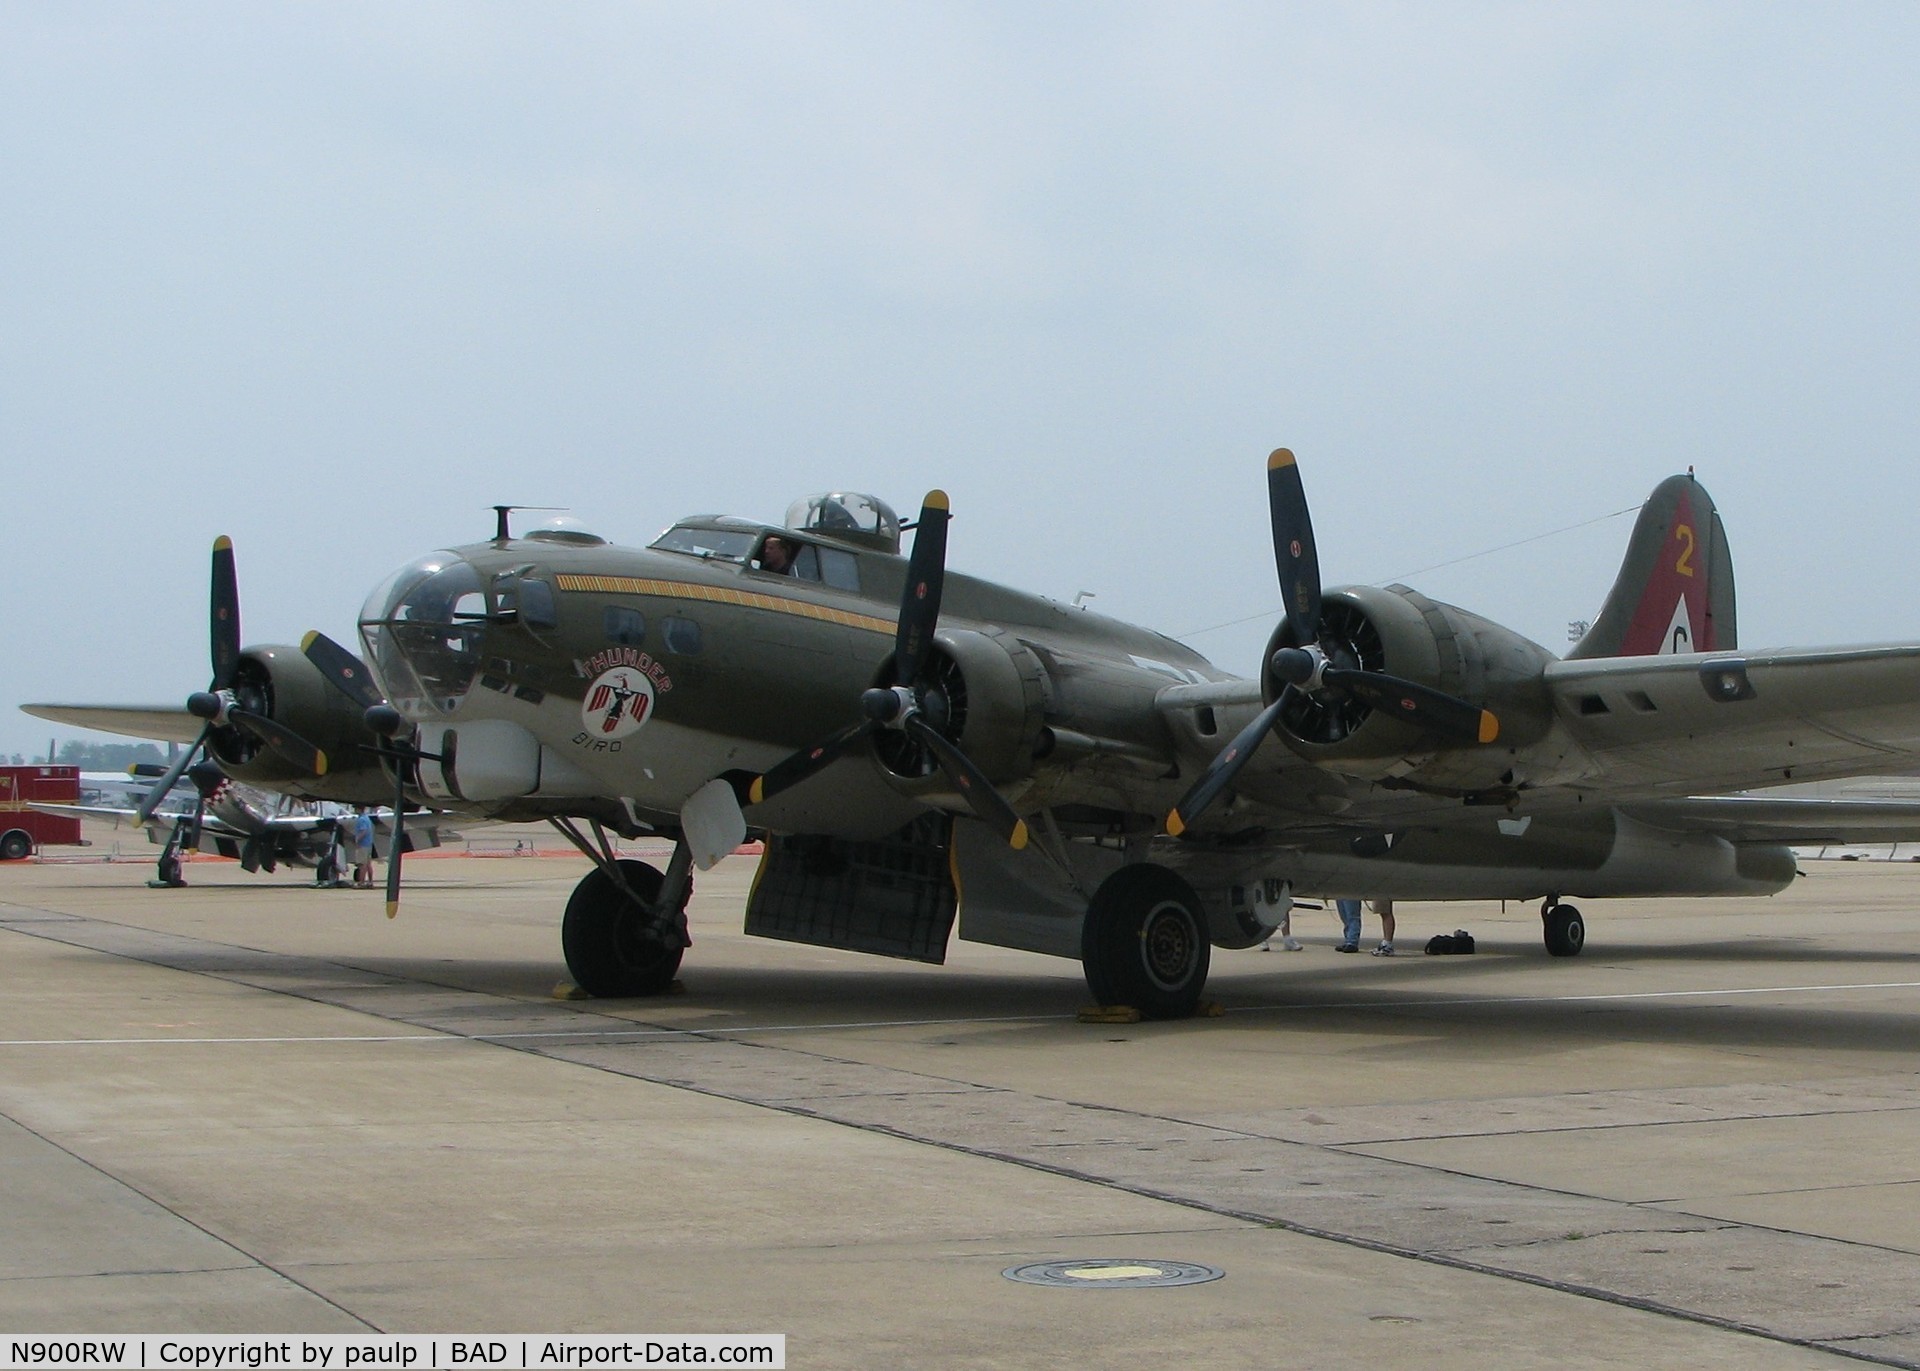 N900RW, 1944 Boeing B-17G Flying Fortress C/N 8627, On display after flying with a B-52 at Barksdale Air Force Base.